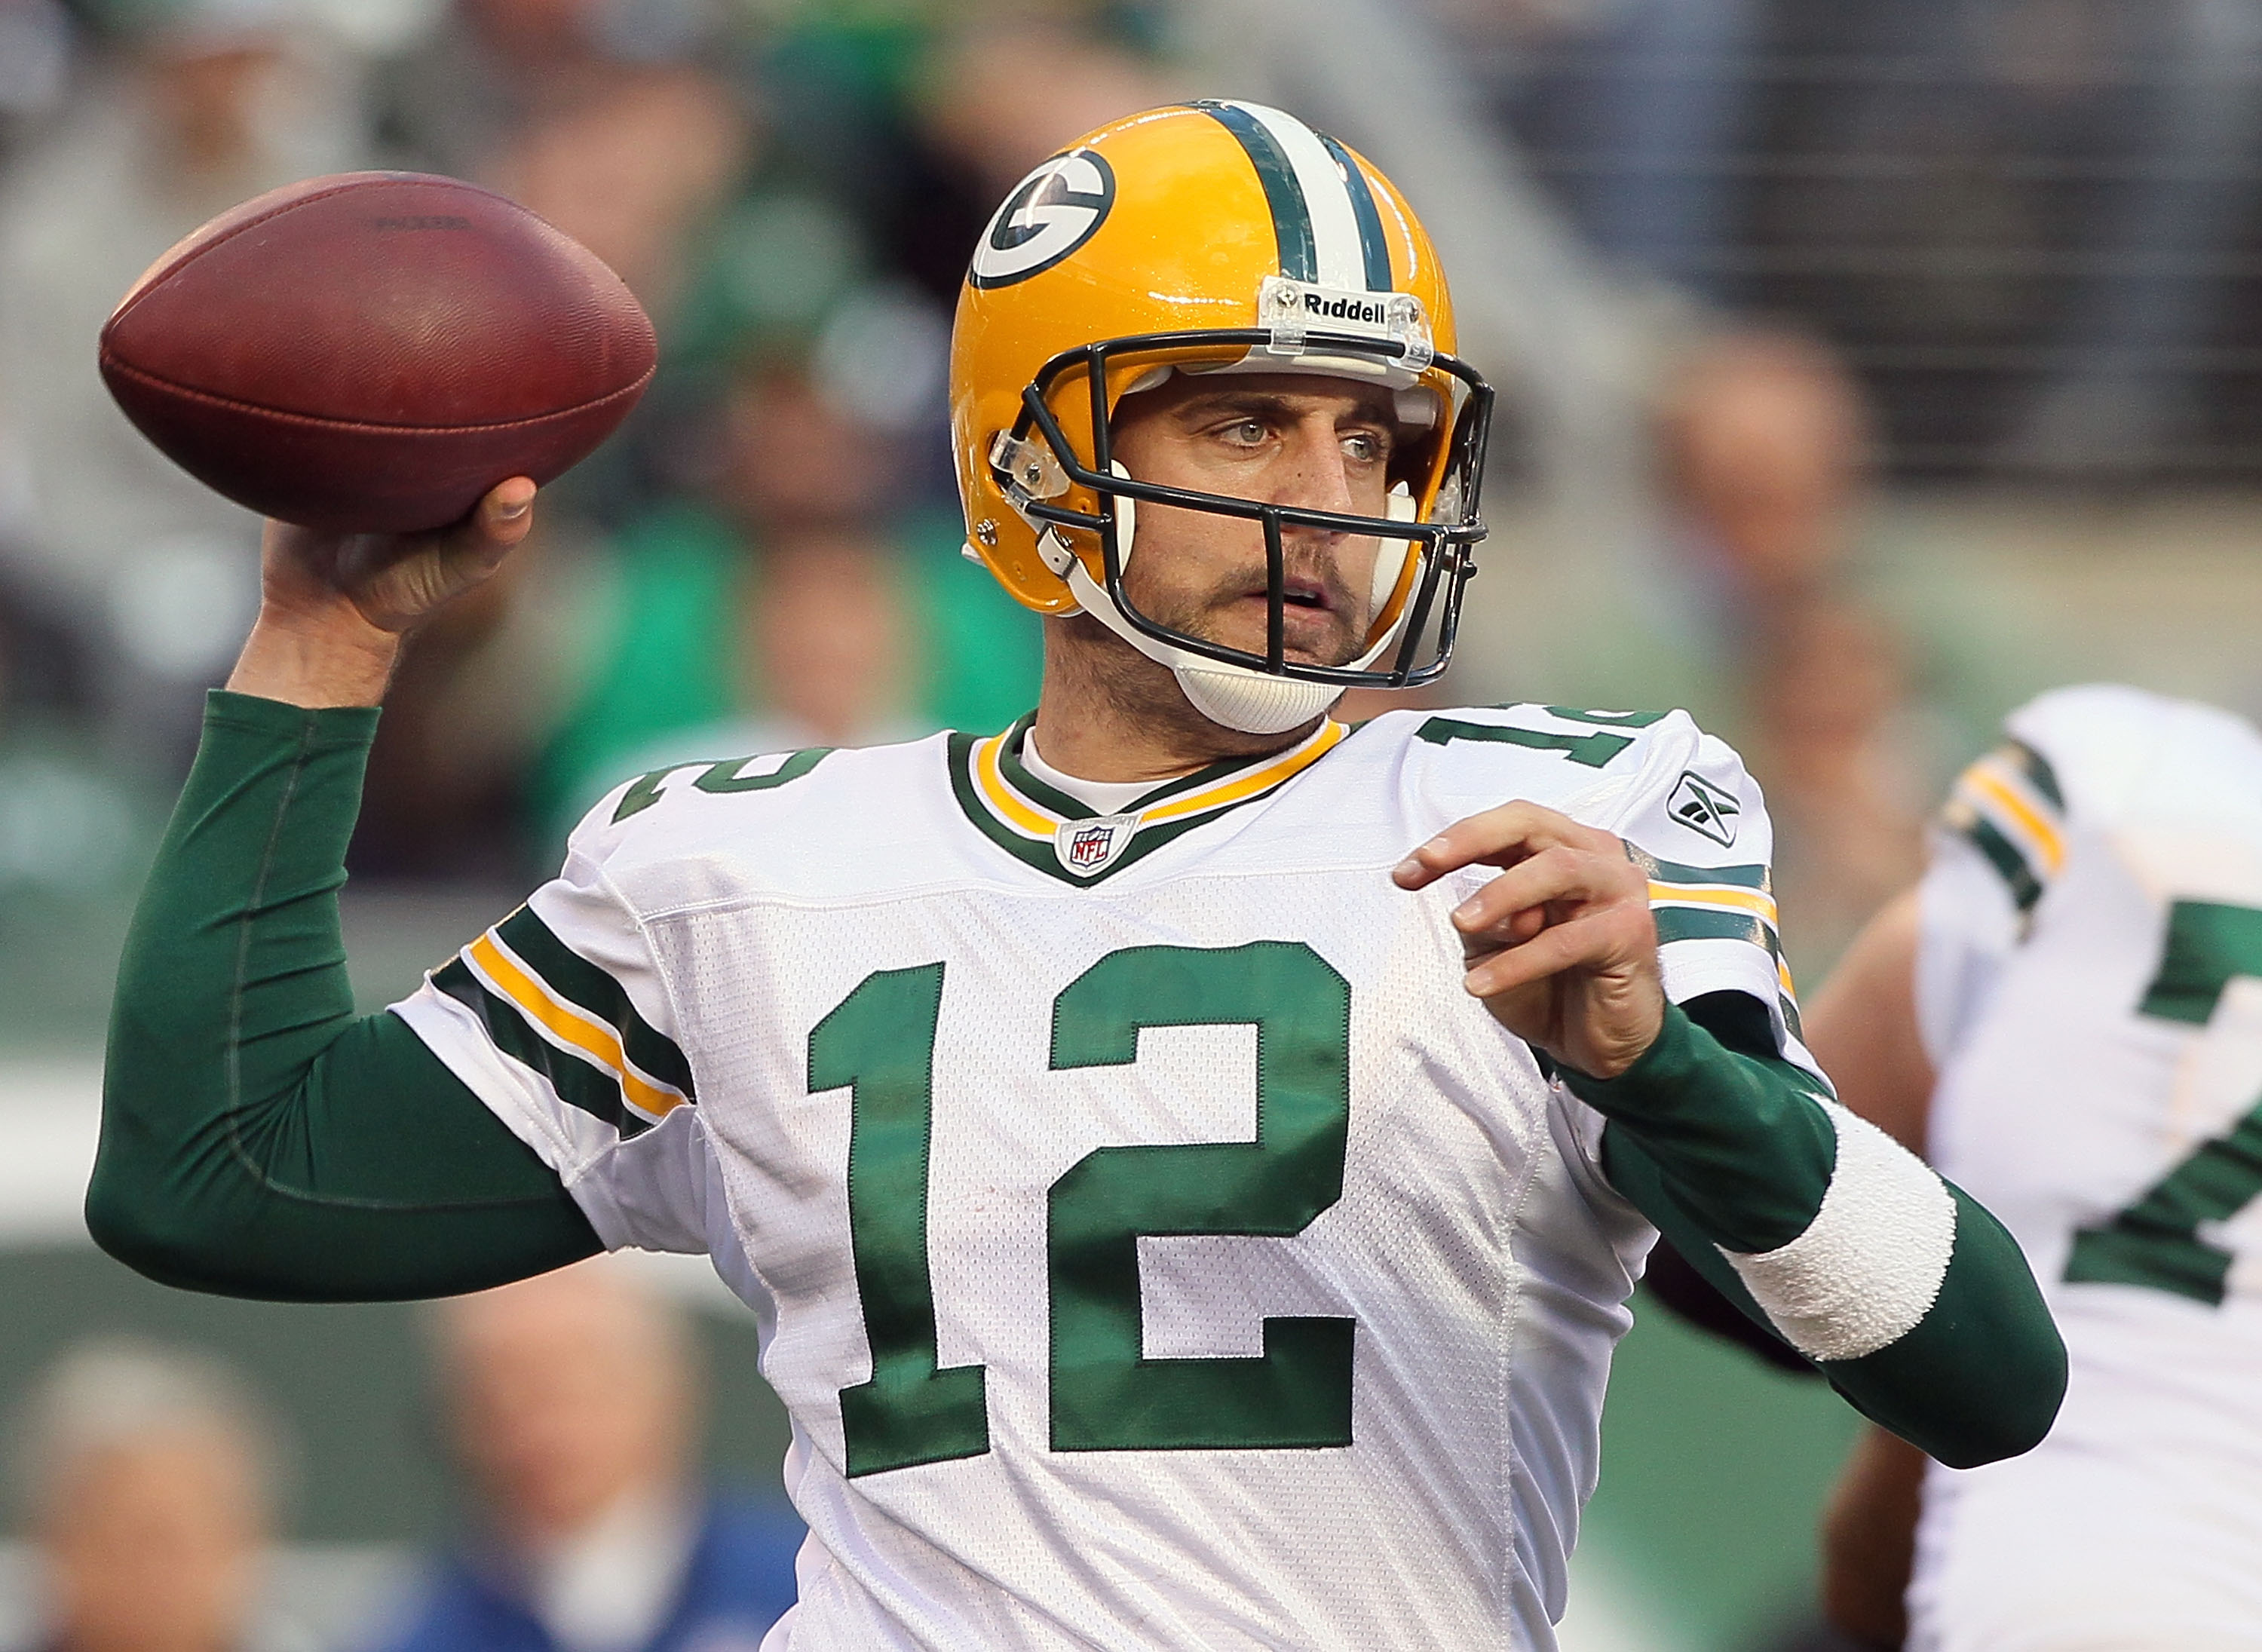 EAST RUTHERFORD, NJ - OCTOBER 31: Aaron Rodgers #12 of the Green Bay Packers throws a pass against the New York Jets on October 31, 2010 at the New Meadowlands Stadium in East Rutherford, New Jersey.The Packers defeated the Jets 9-0. (Photo by Jim McIsaac